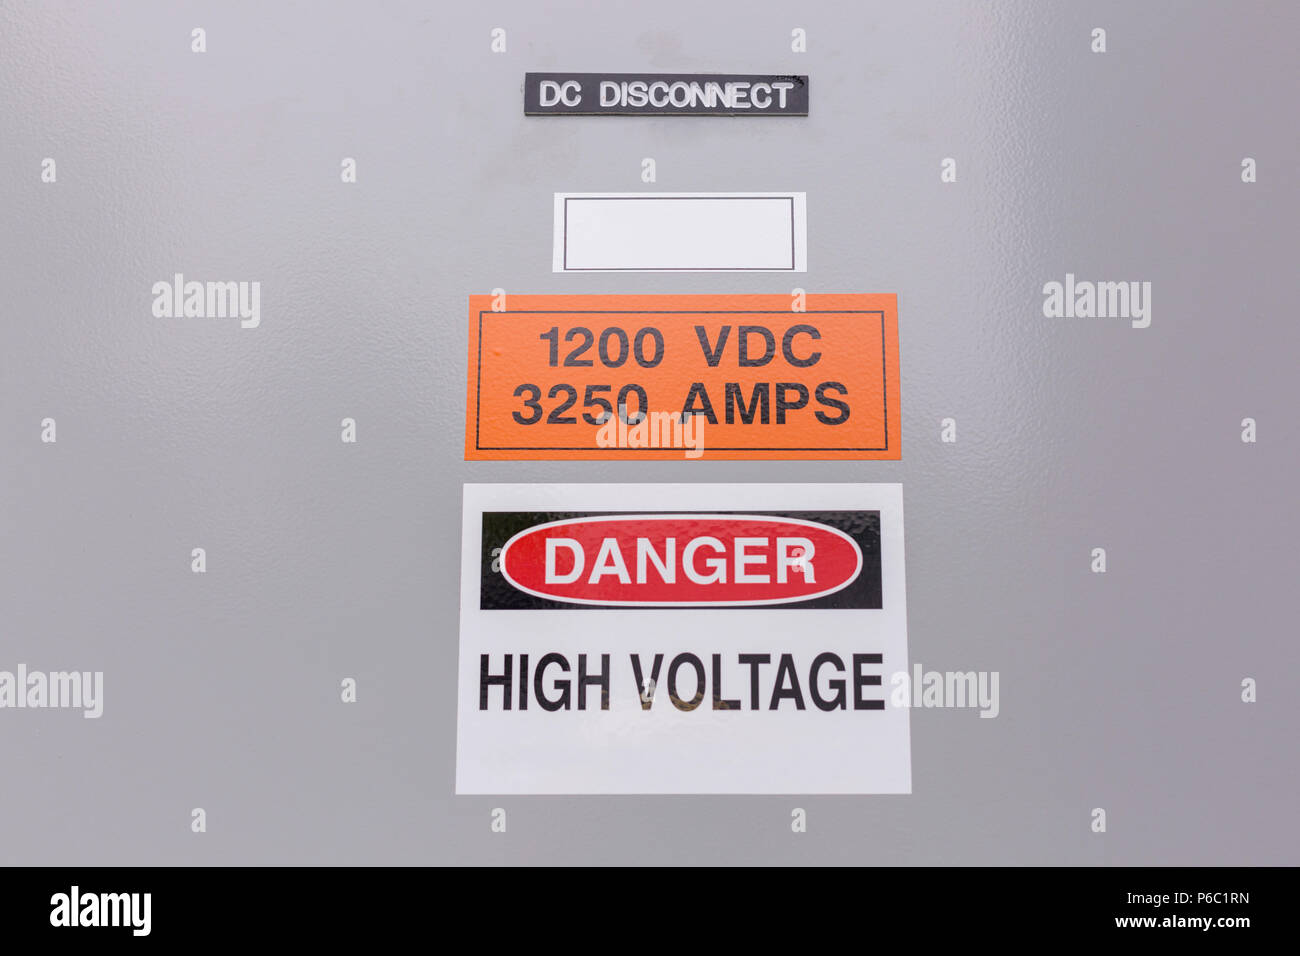 High Voltage sign on DC Disconnect panel Stock Photo